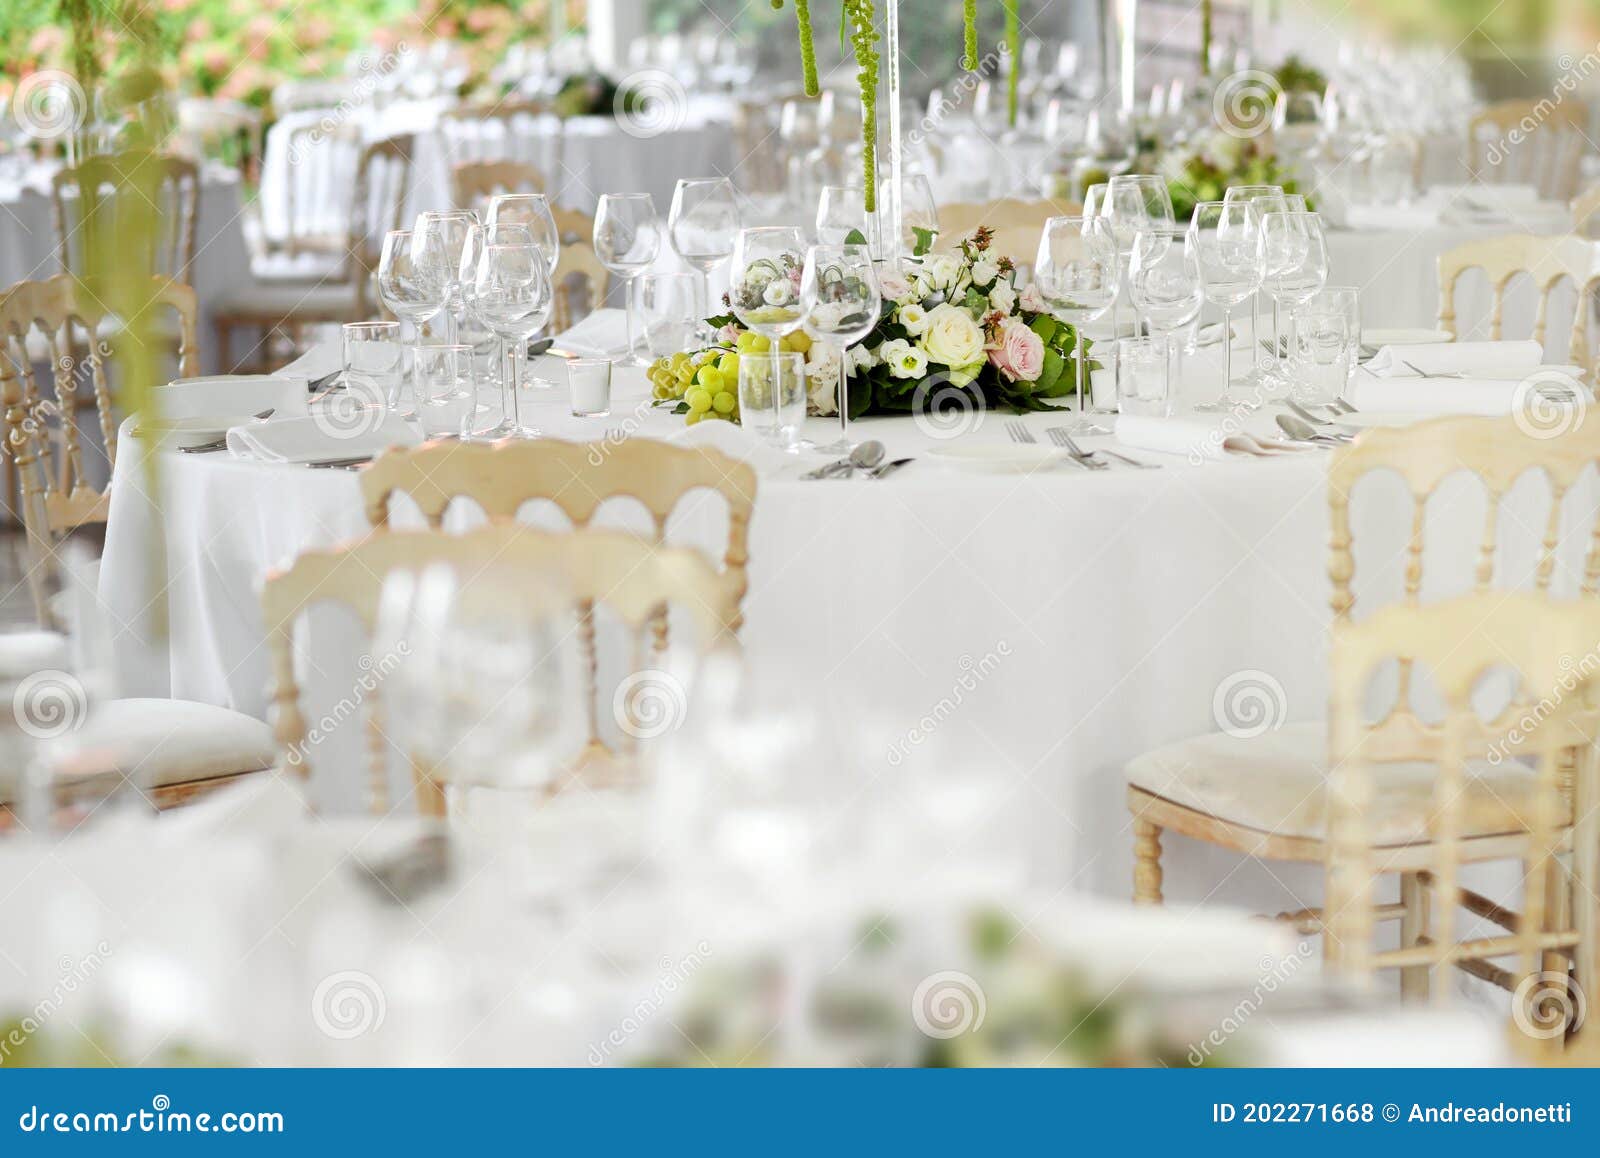 formal table settings at a wedding venue